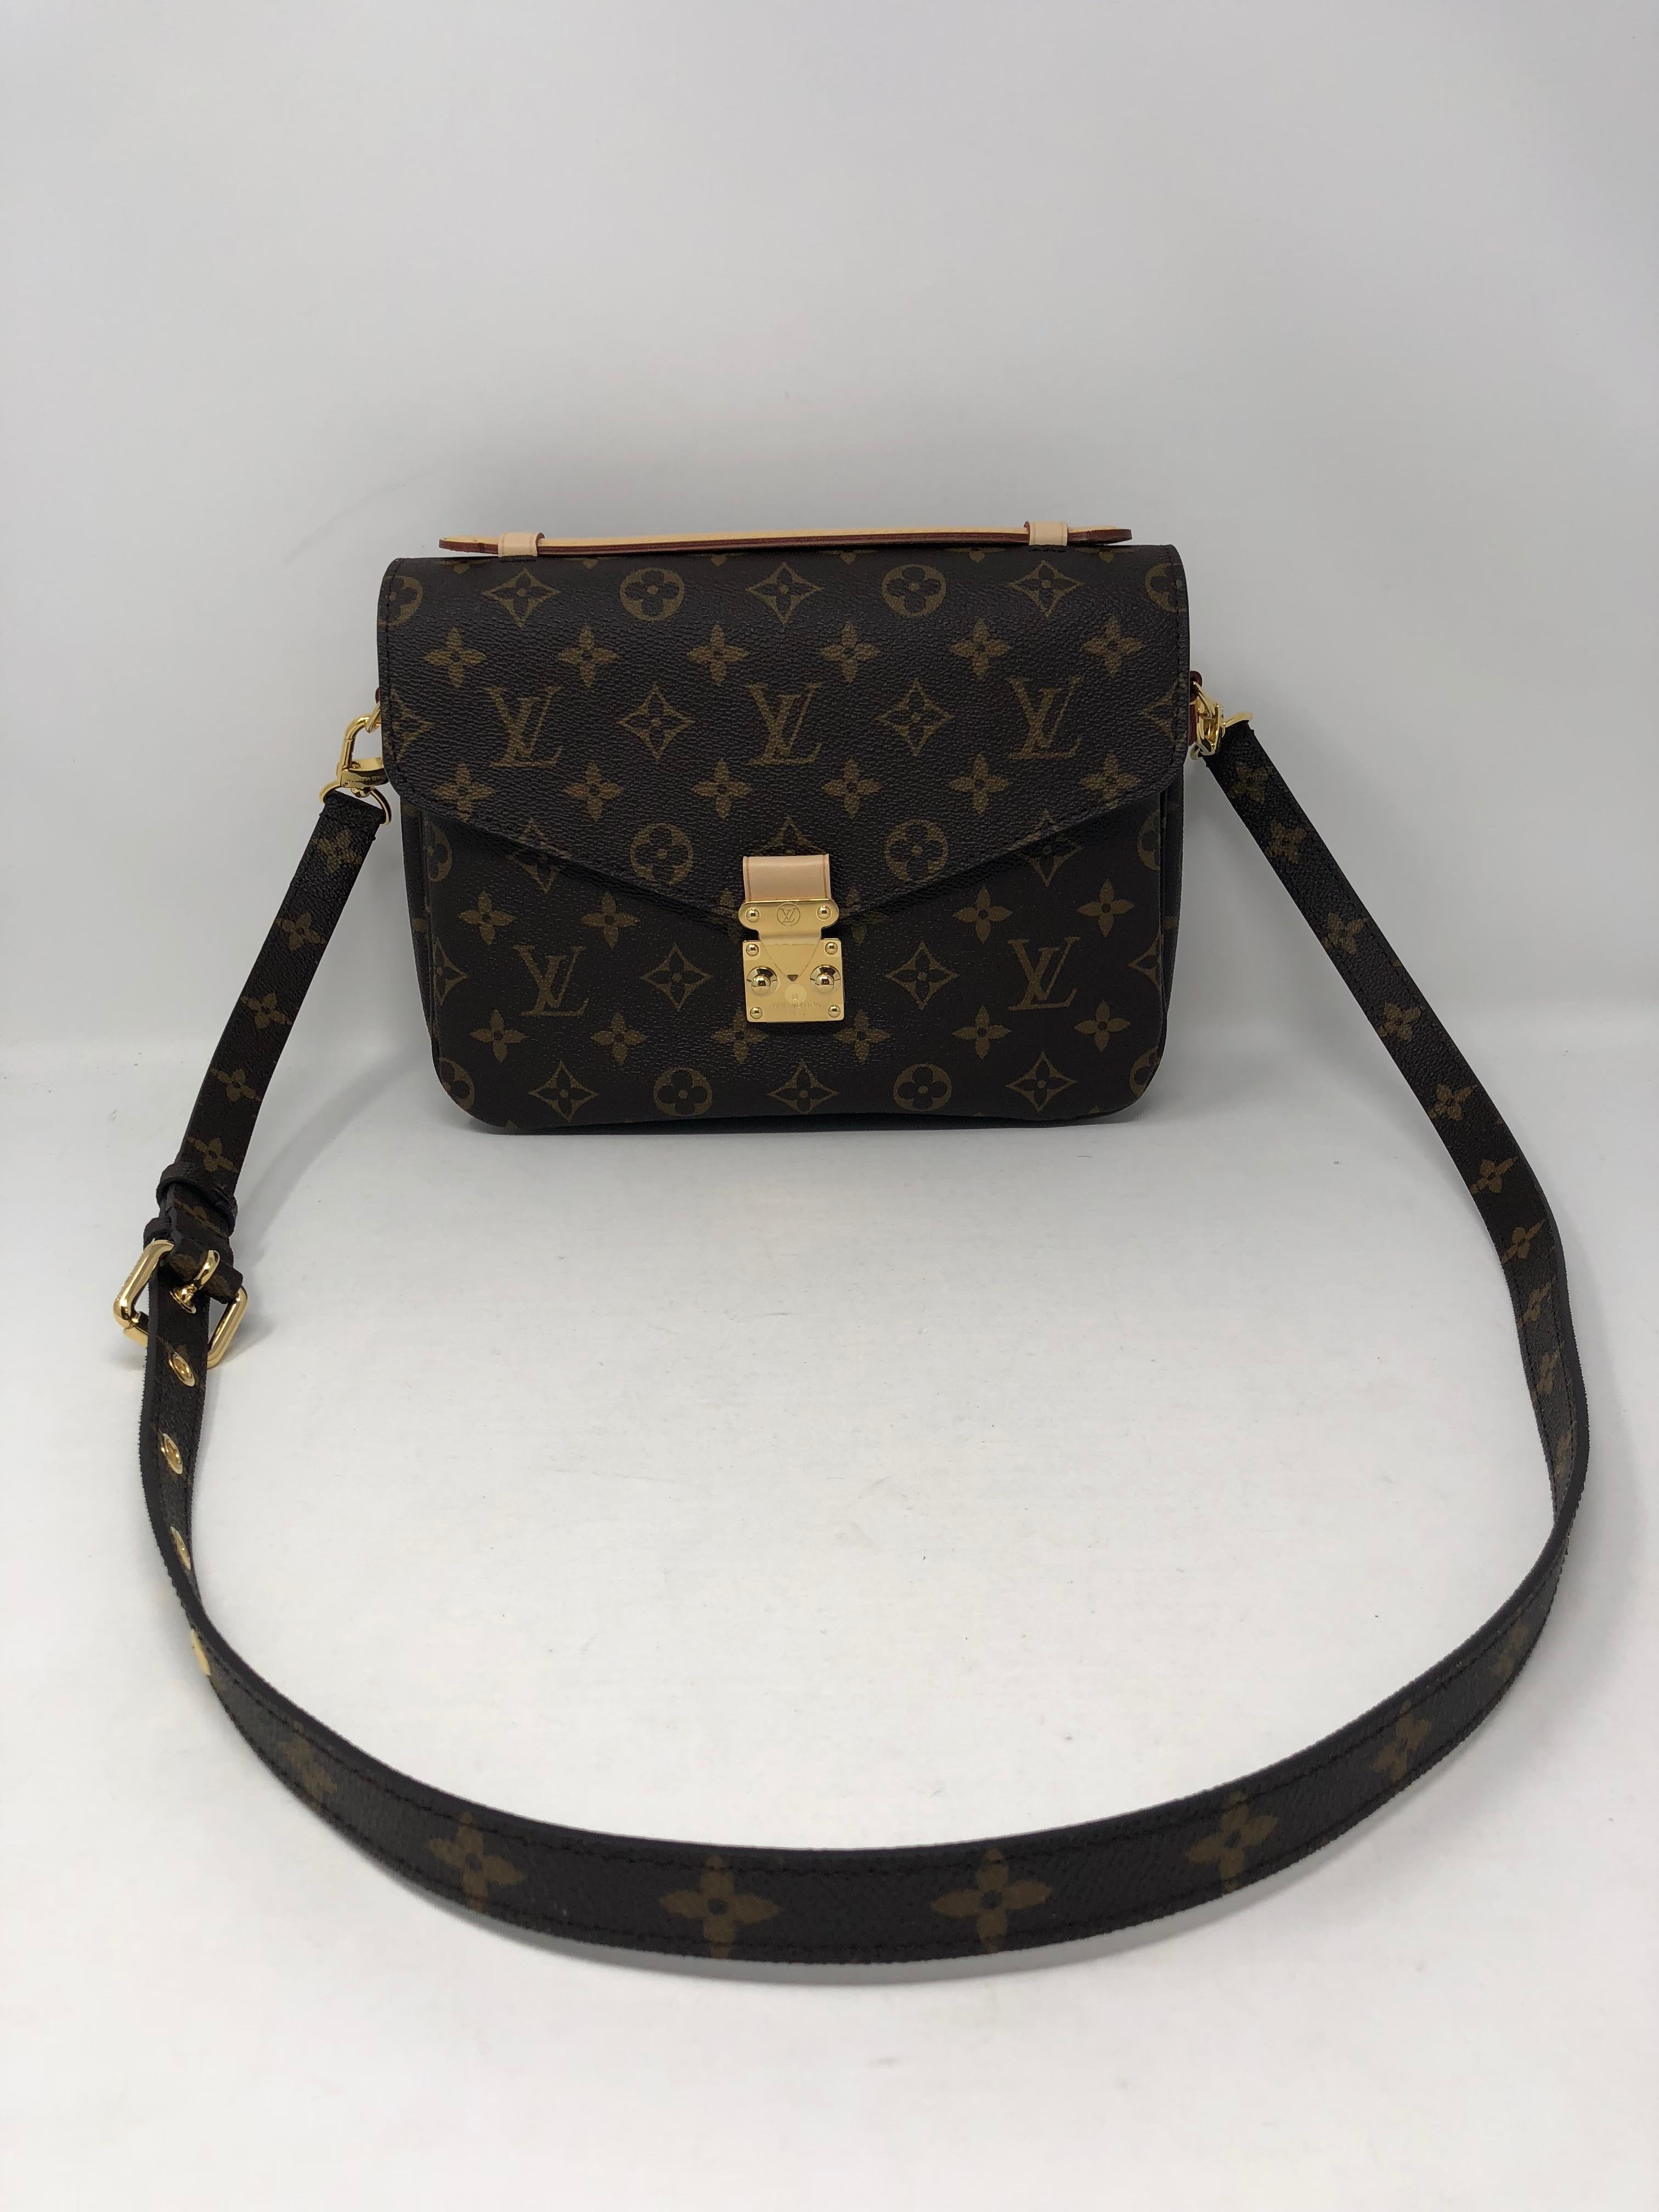 Louis Vuitton Pochette Metis in monogram crossbody. The strap is detachable. Sold out and Brand New. Very limited. It's the perfect bag for everyday use. 